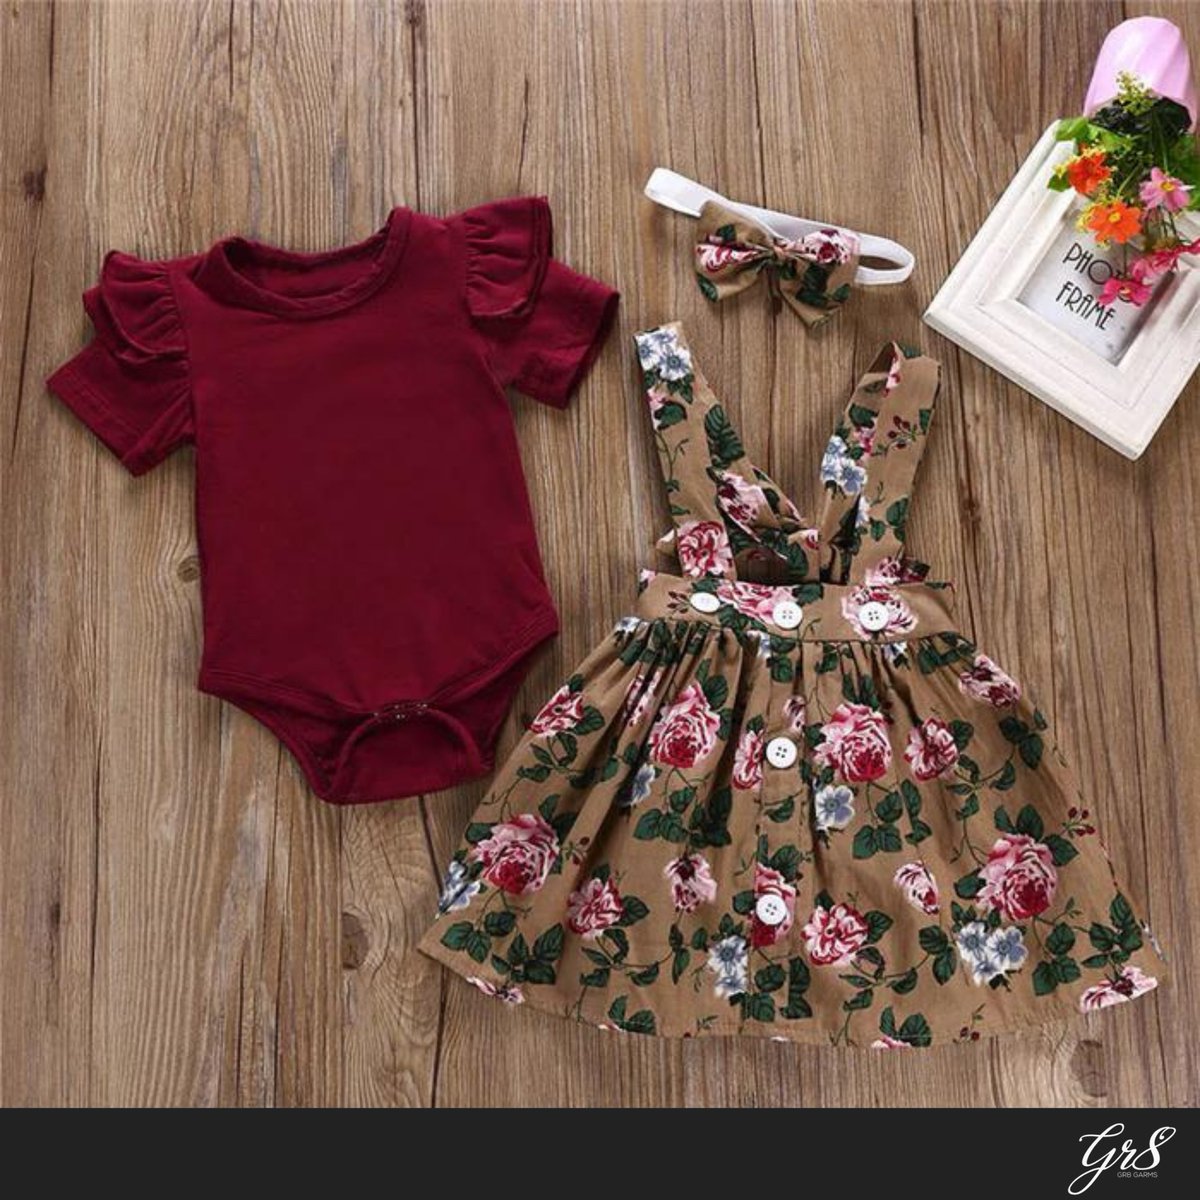 With cute prints and soft fabrics, our baby girl outfits are perfect for springtime adventures and special moments 😍

#BeGr8 #LookGr8 #FeelGr8 #LiveGr8 #Fashion #Clothing #WomensClothing #MensClothing #KidsClothing #OOTD #WomensFashion #FashionBrand #ElevateYourStyle